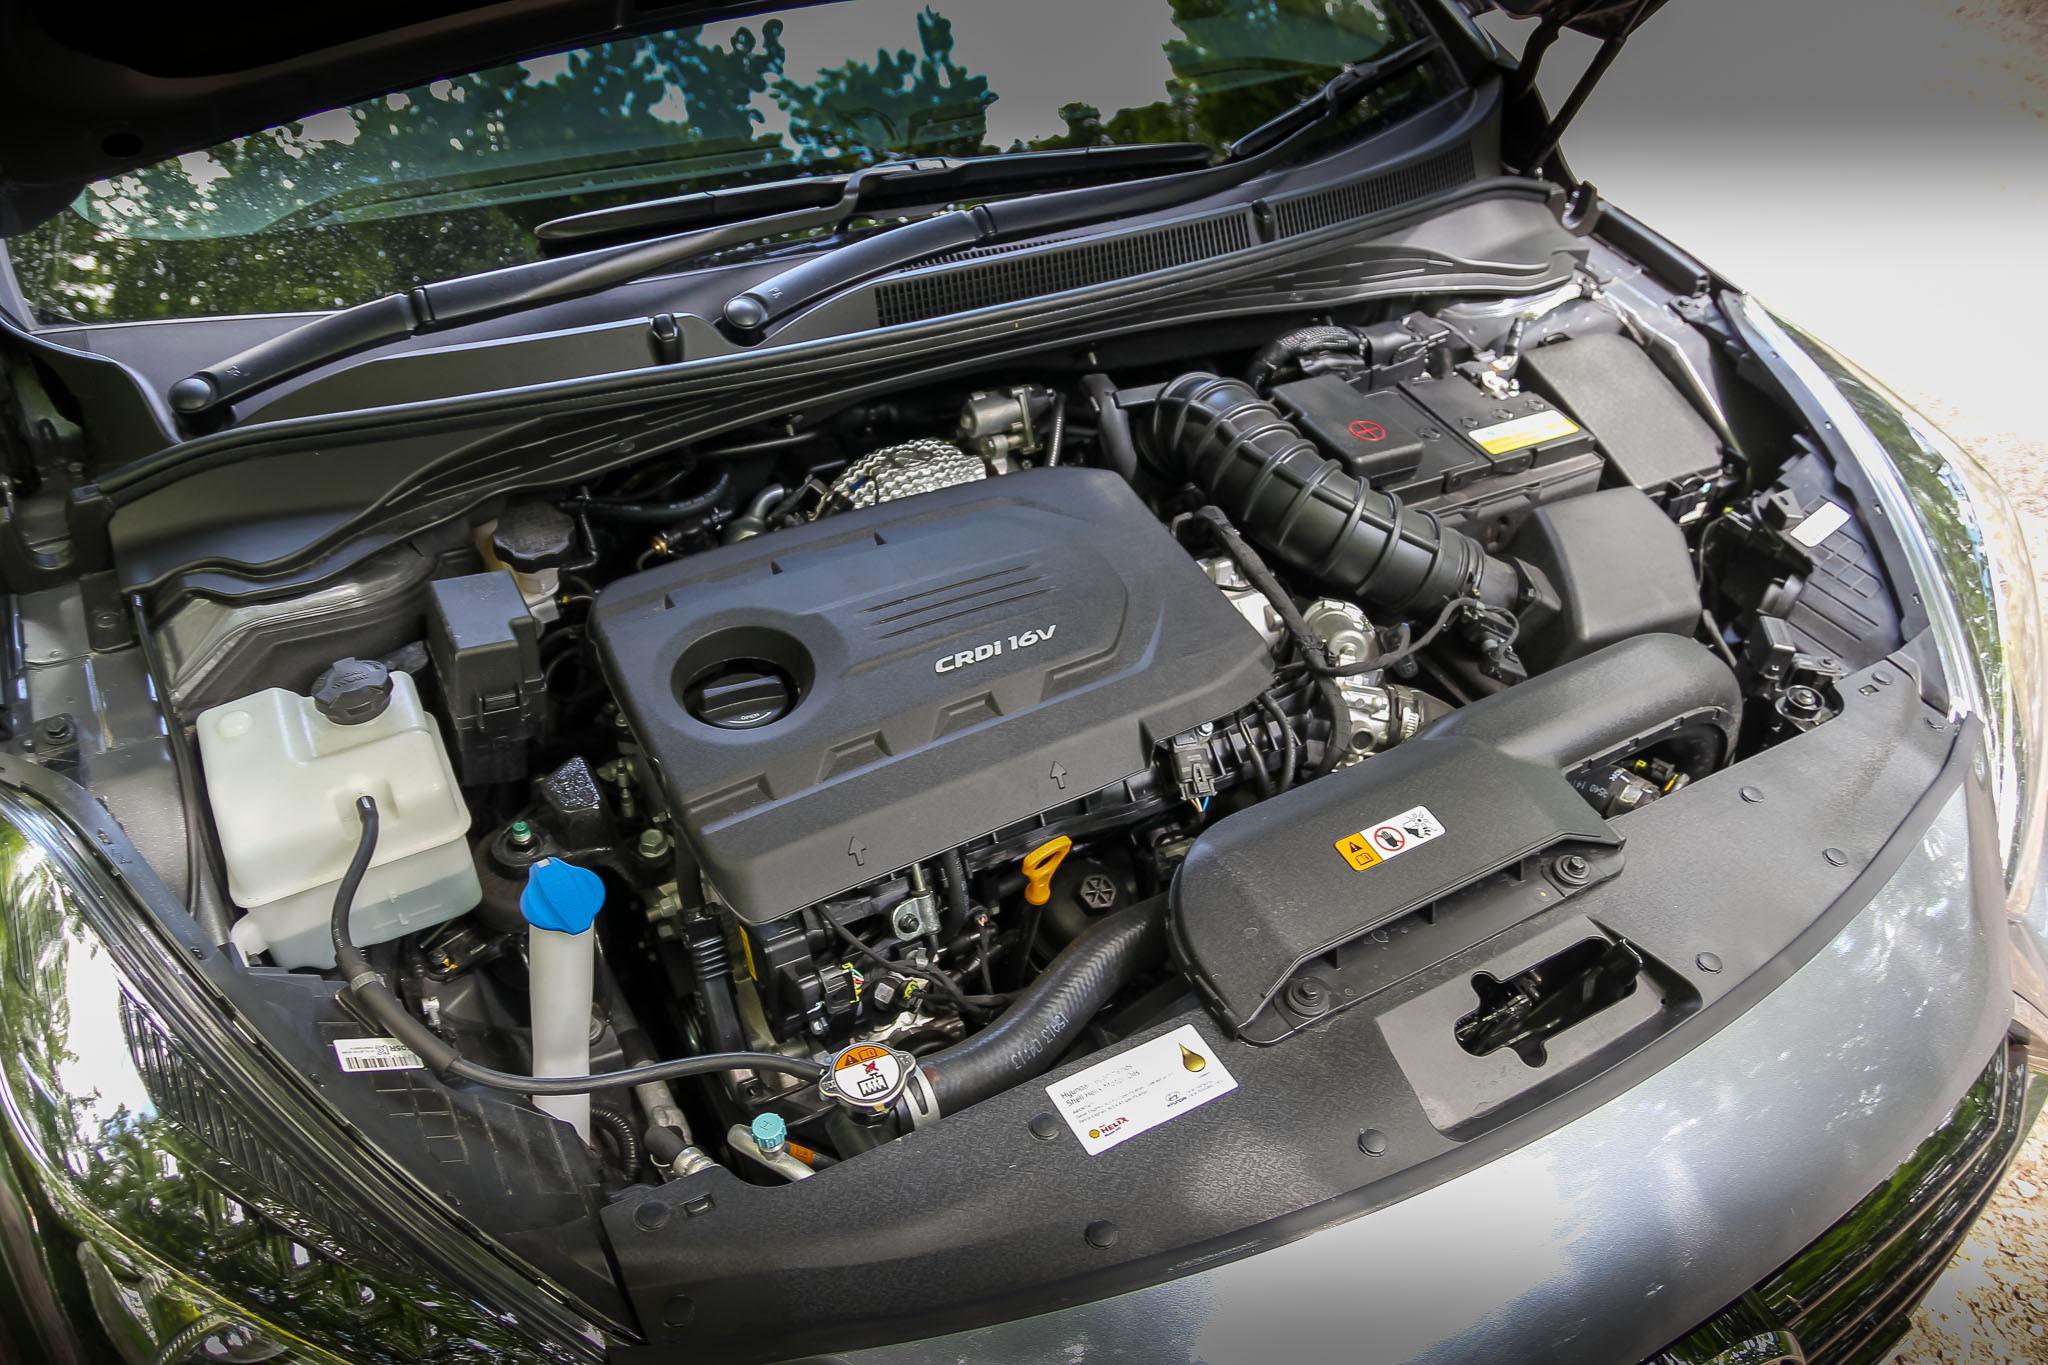 Car Battery Problems Is It Time For A New Car Battery?